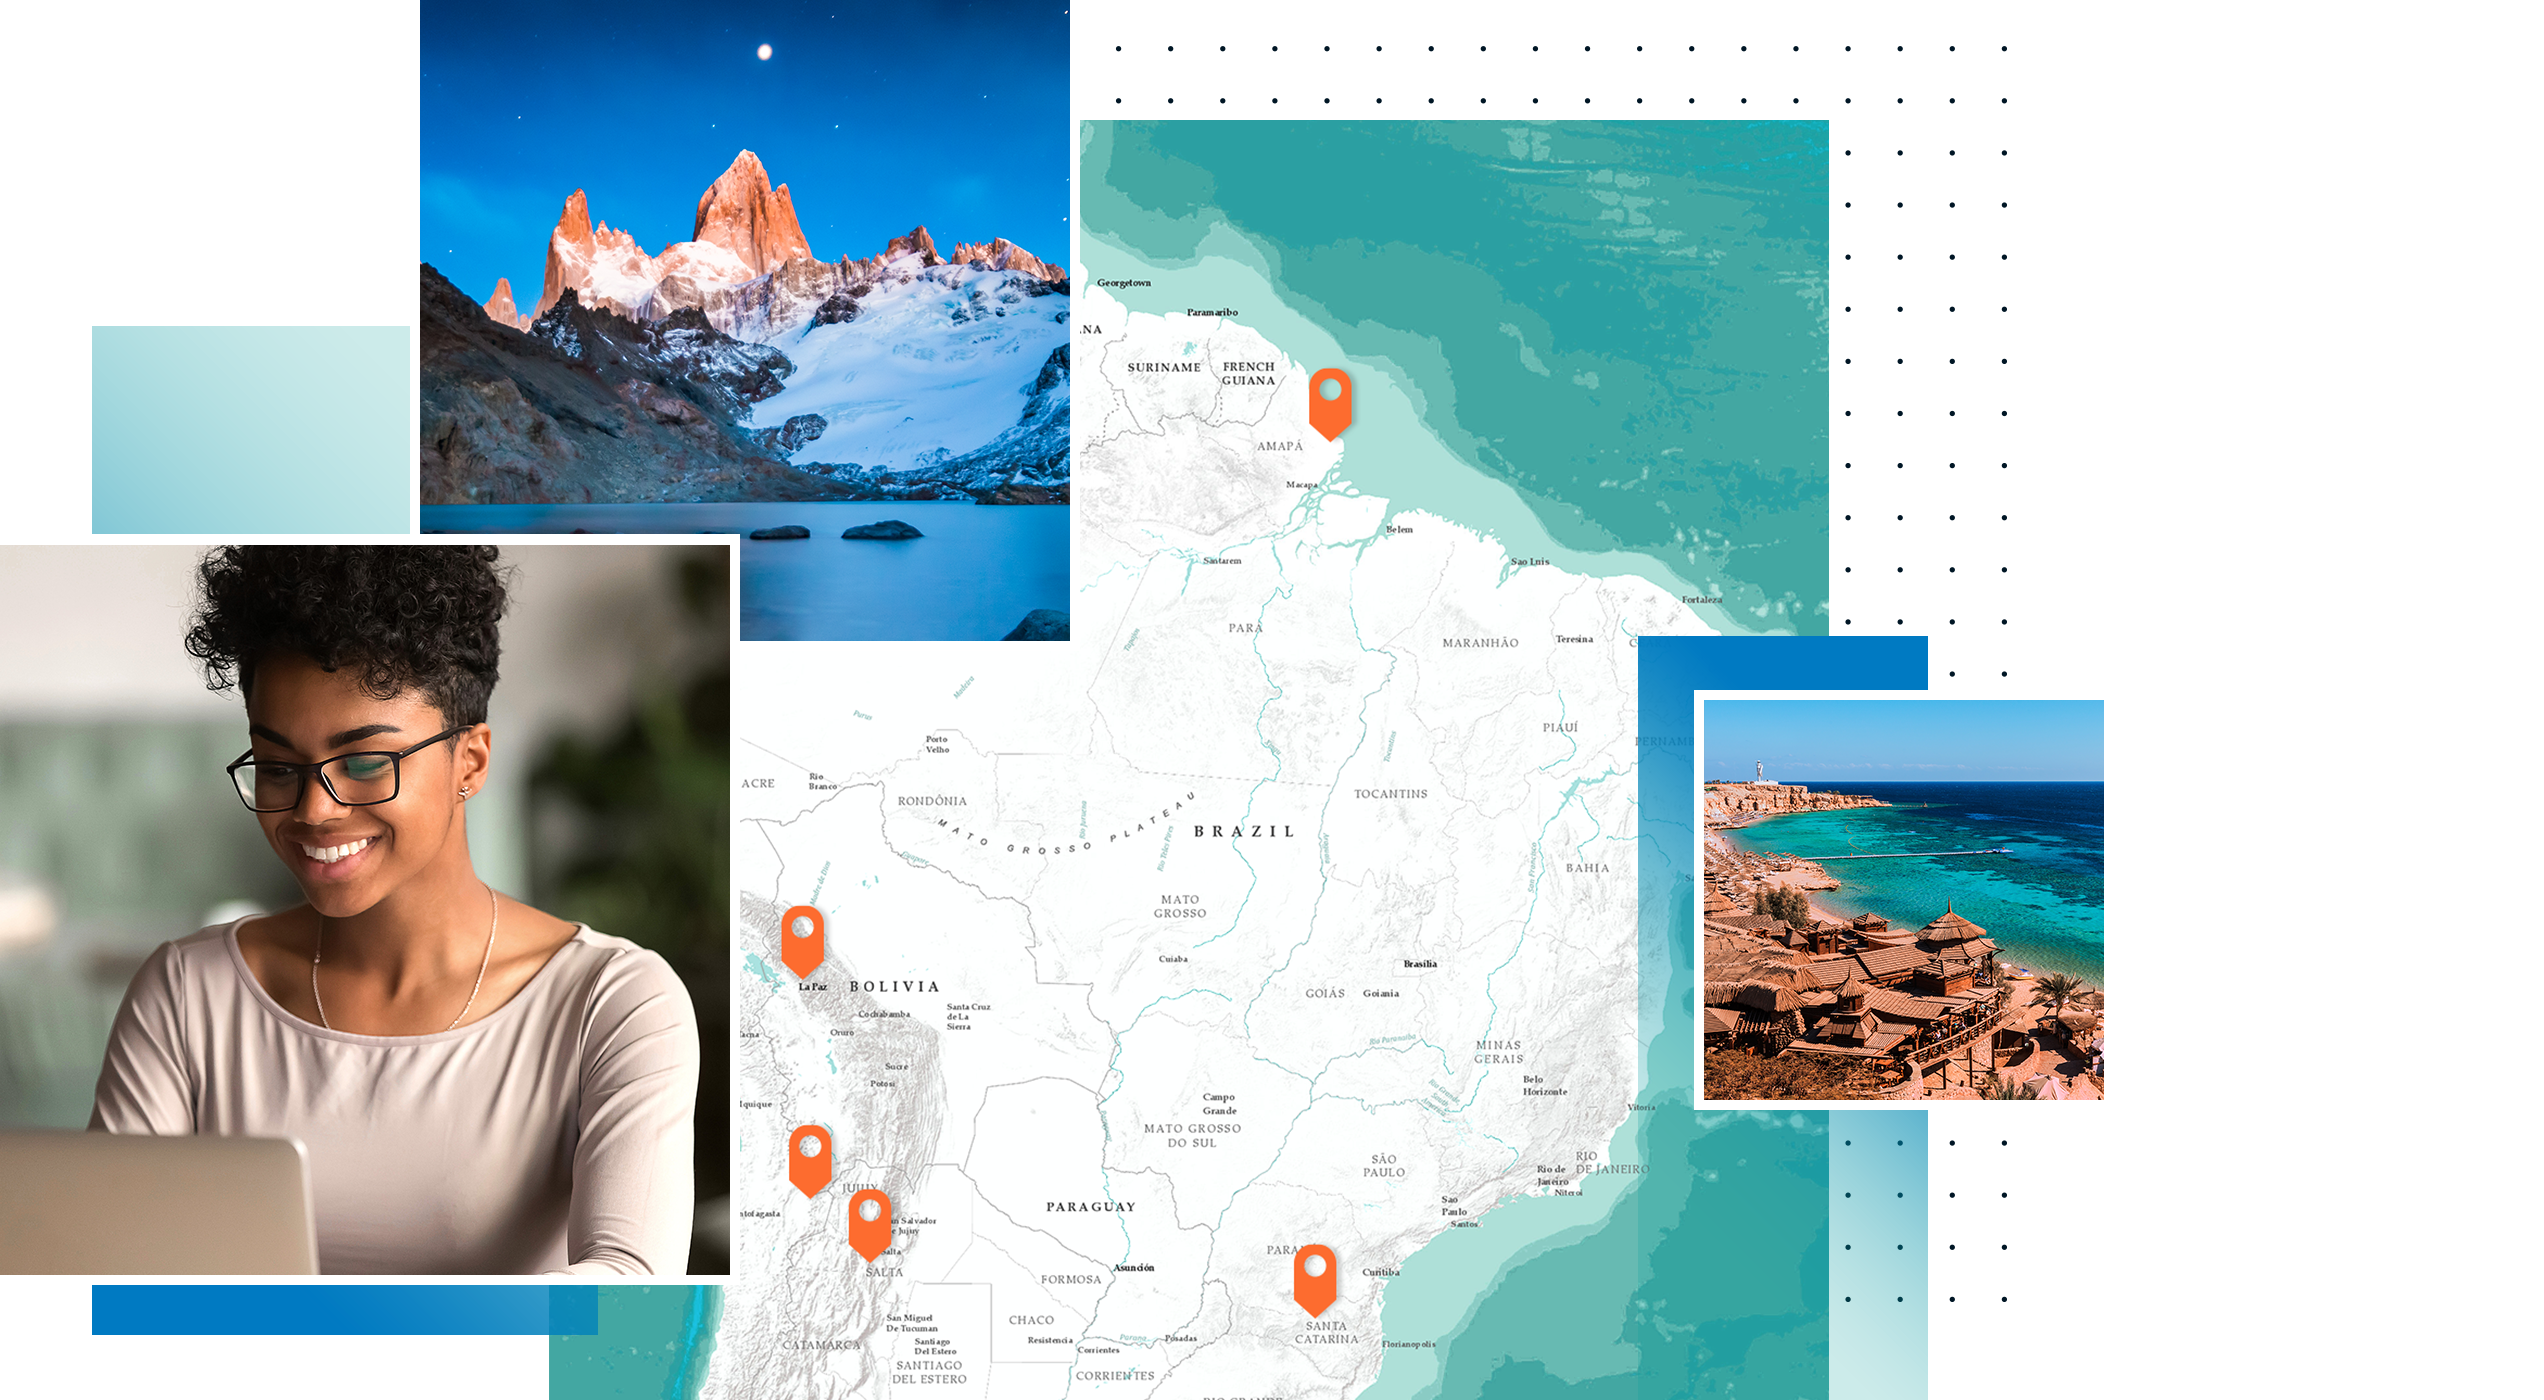 A series of images including a woman typing on a laptop, a map of South America with five orange place markers, and mountains